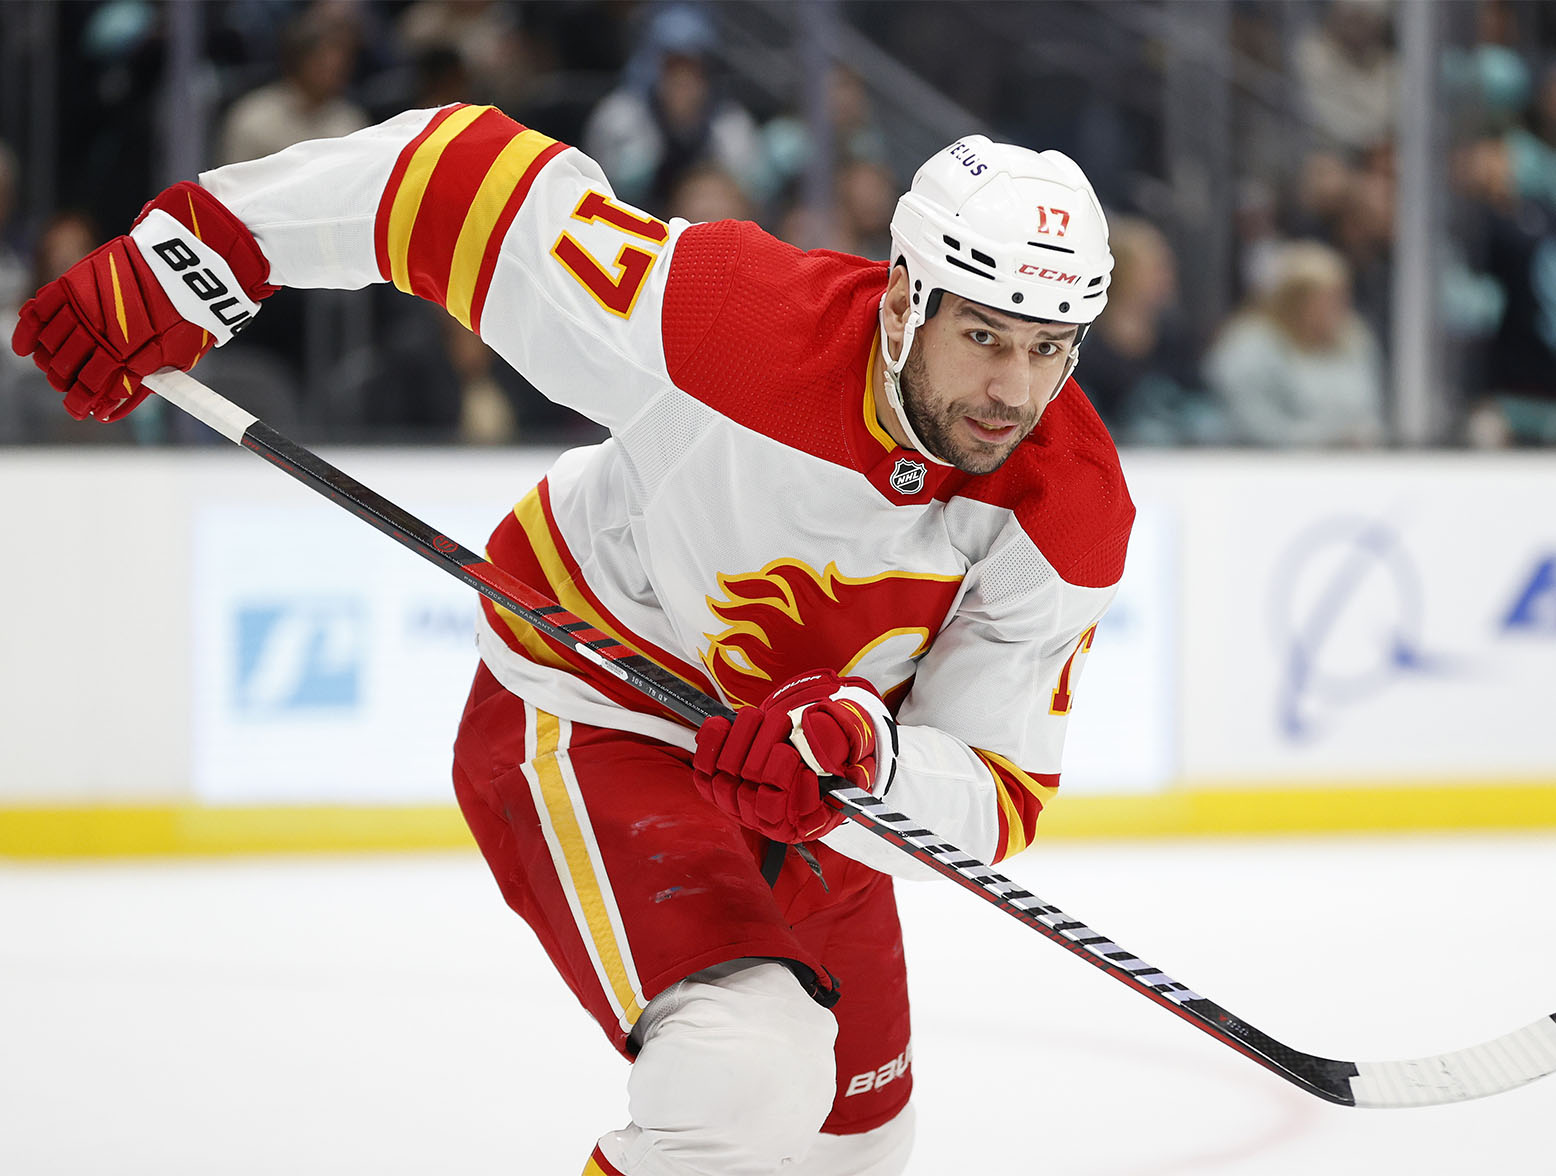 SEATTLE, WASHINGTON - JANUARY 27: Milan Lucic #17 of the Calgary Flames skates during the third period against the Seattle Kraken at Climate Pledge Arena on January 27, 2023 in Seattle, Washington. (Photo by Steph Chambers/Getty Images)